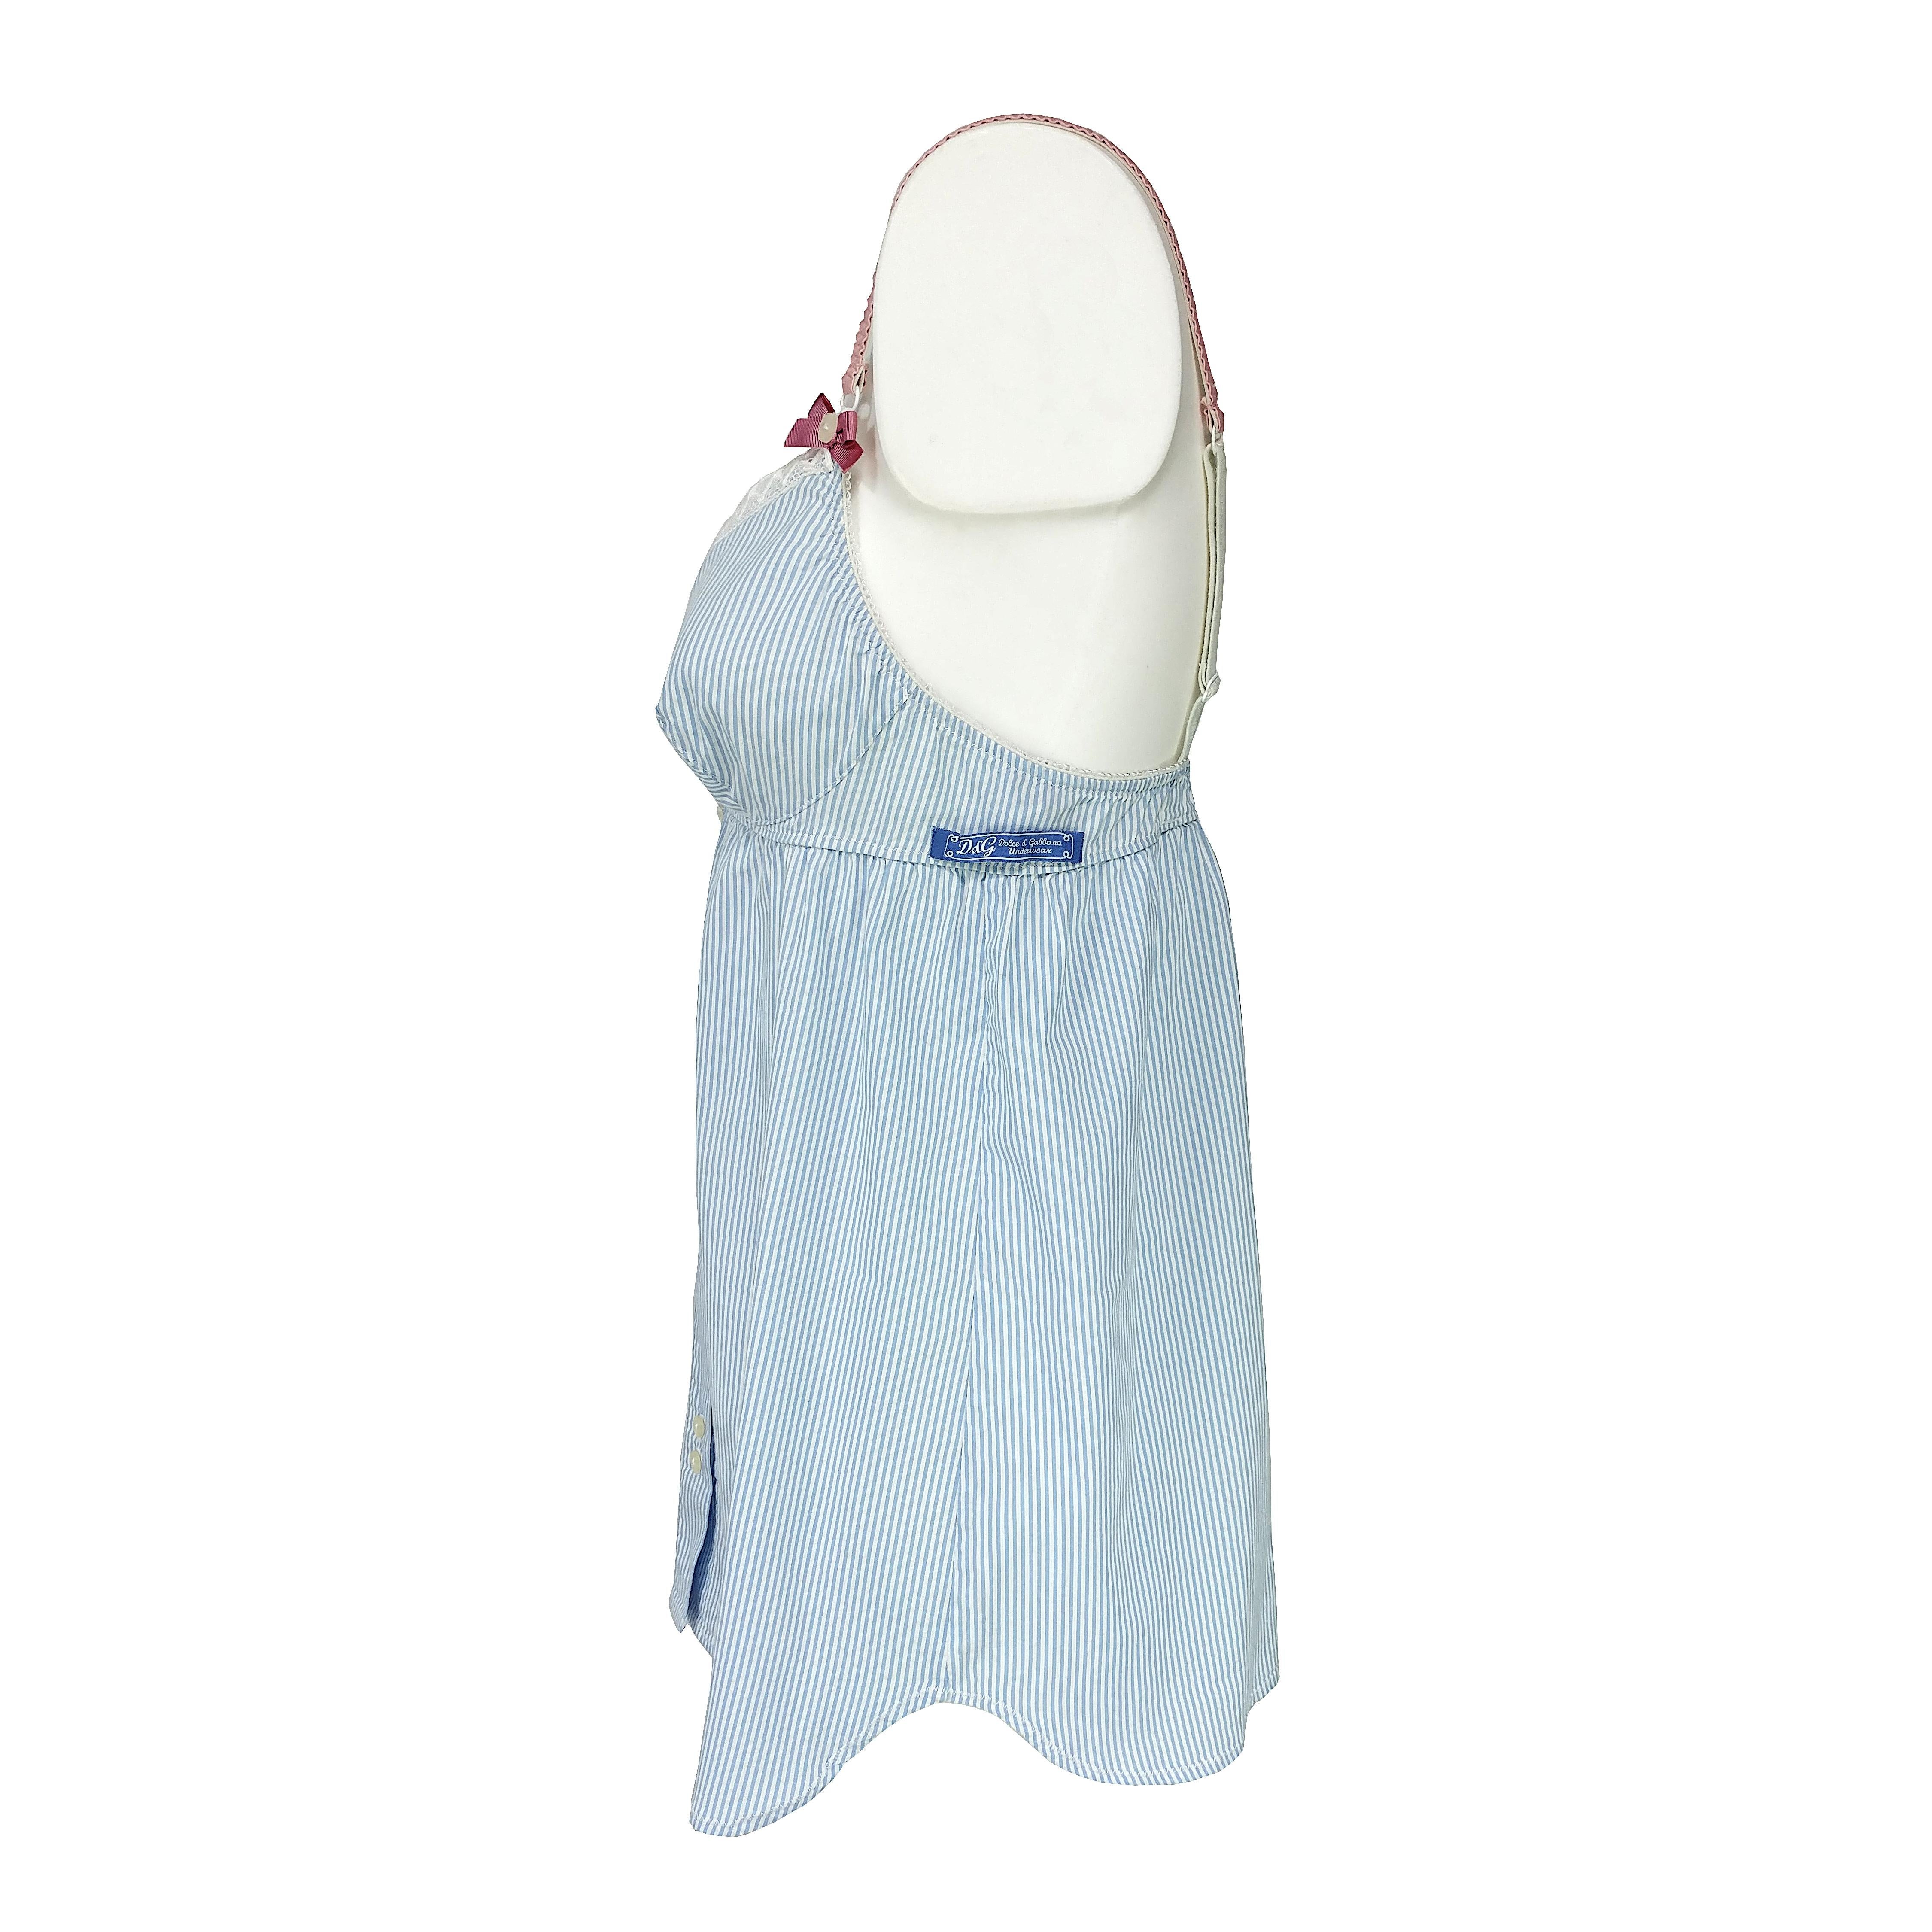 A very special babydoll in a white and azure stripes cotton popeline fabric. It features six bottons on the front side, all engraved with the Dolce & Gabbana logo, a white lace on the neckline, pink shoulder straps and bows. Both the straps and the